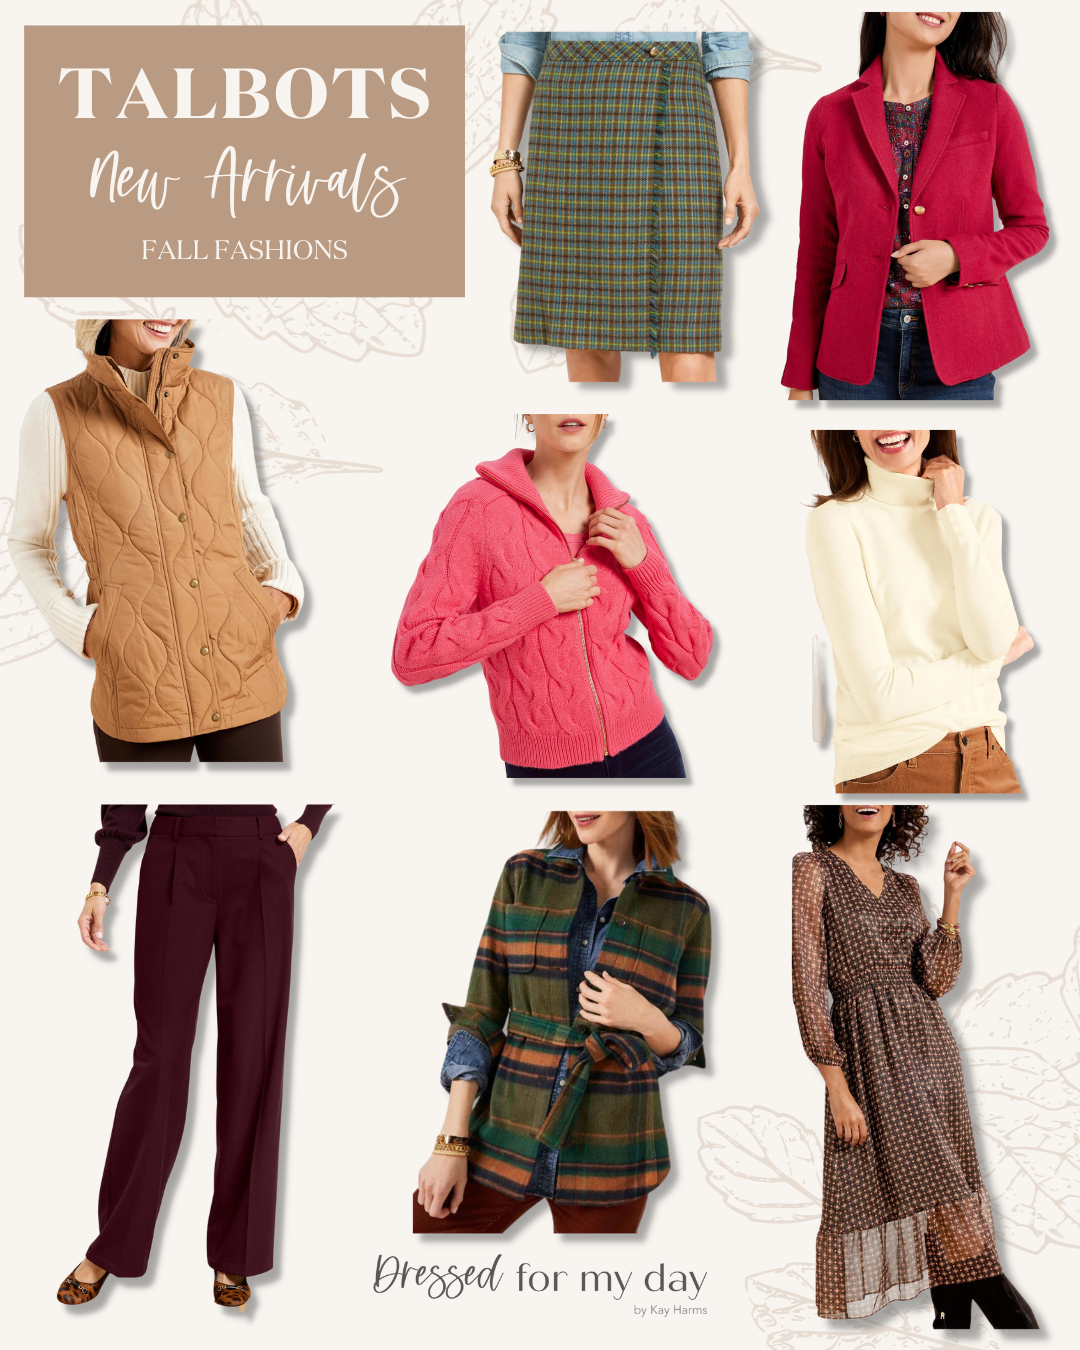 Talbots New Arrivals: Fall Fashions - Dressed for My Day